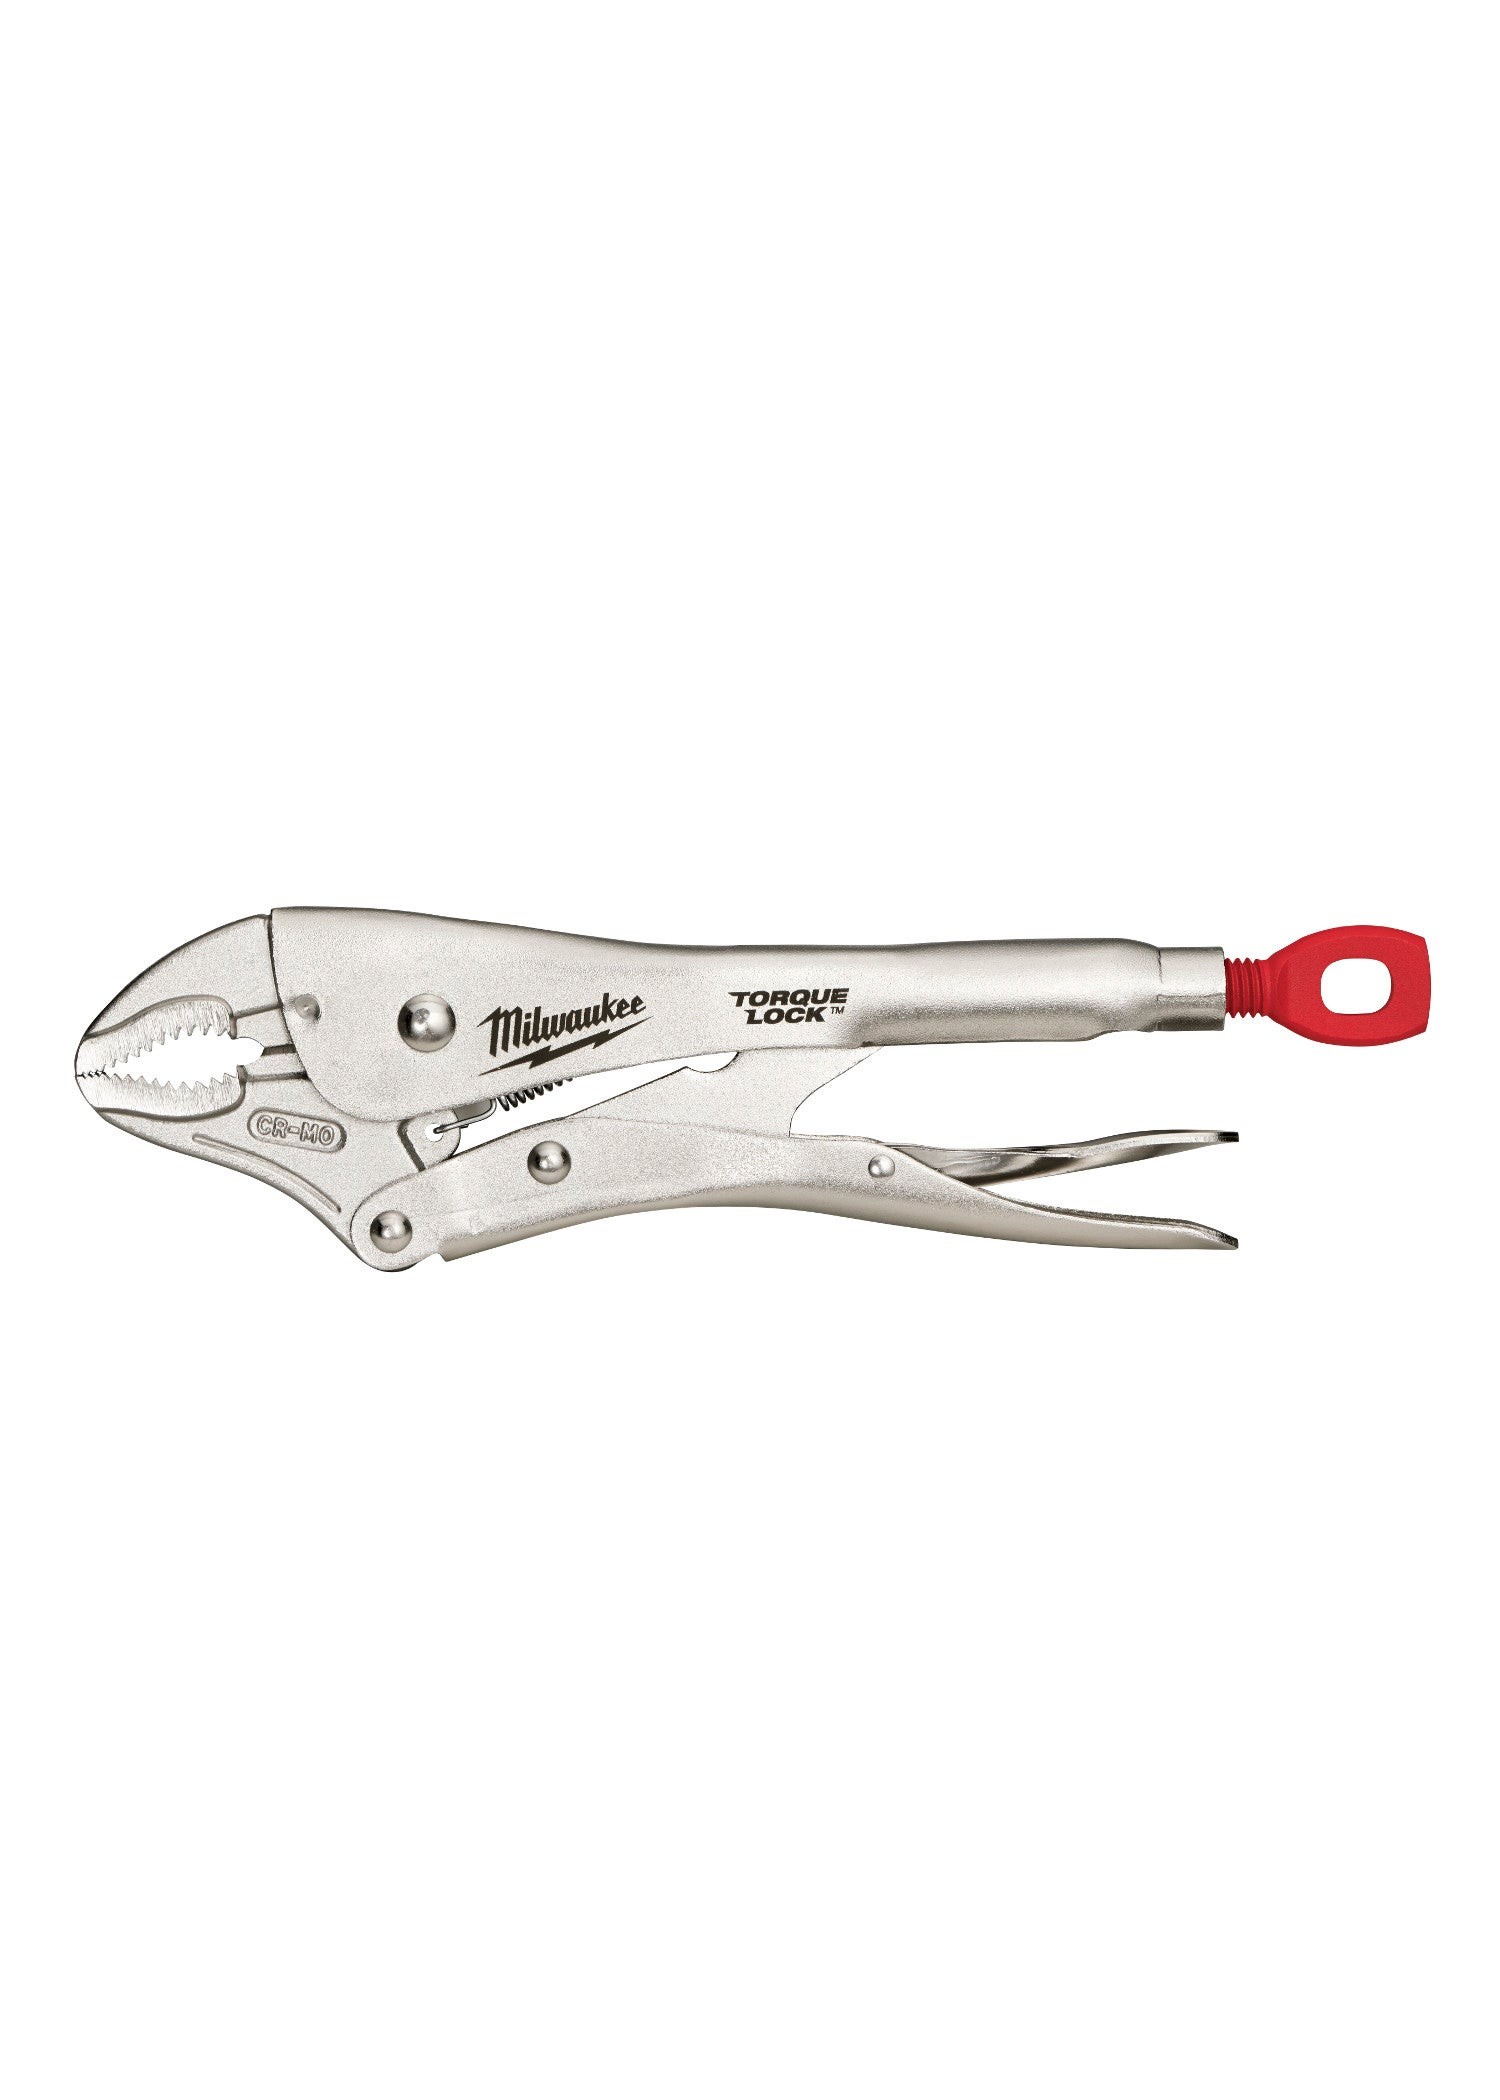 10" Curved Jaw Locking Pliers